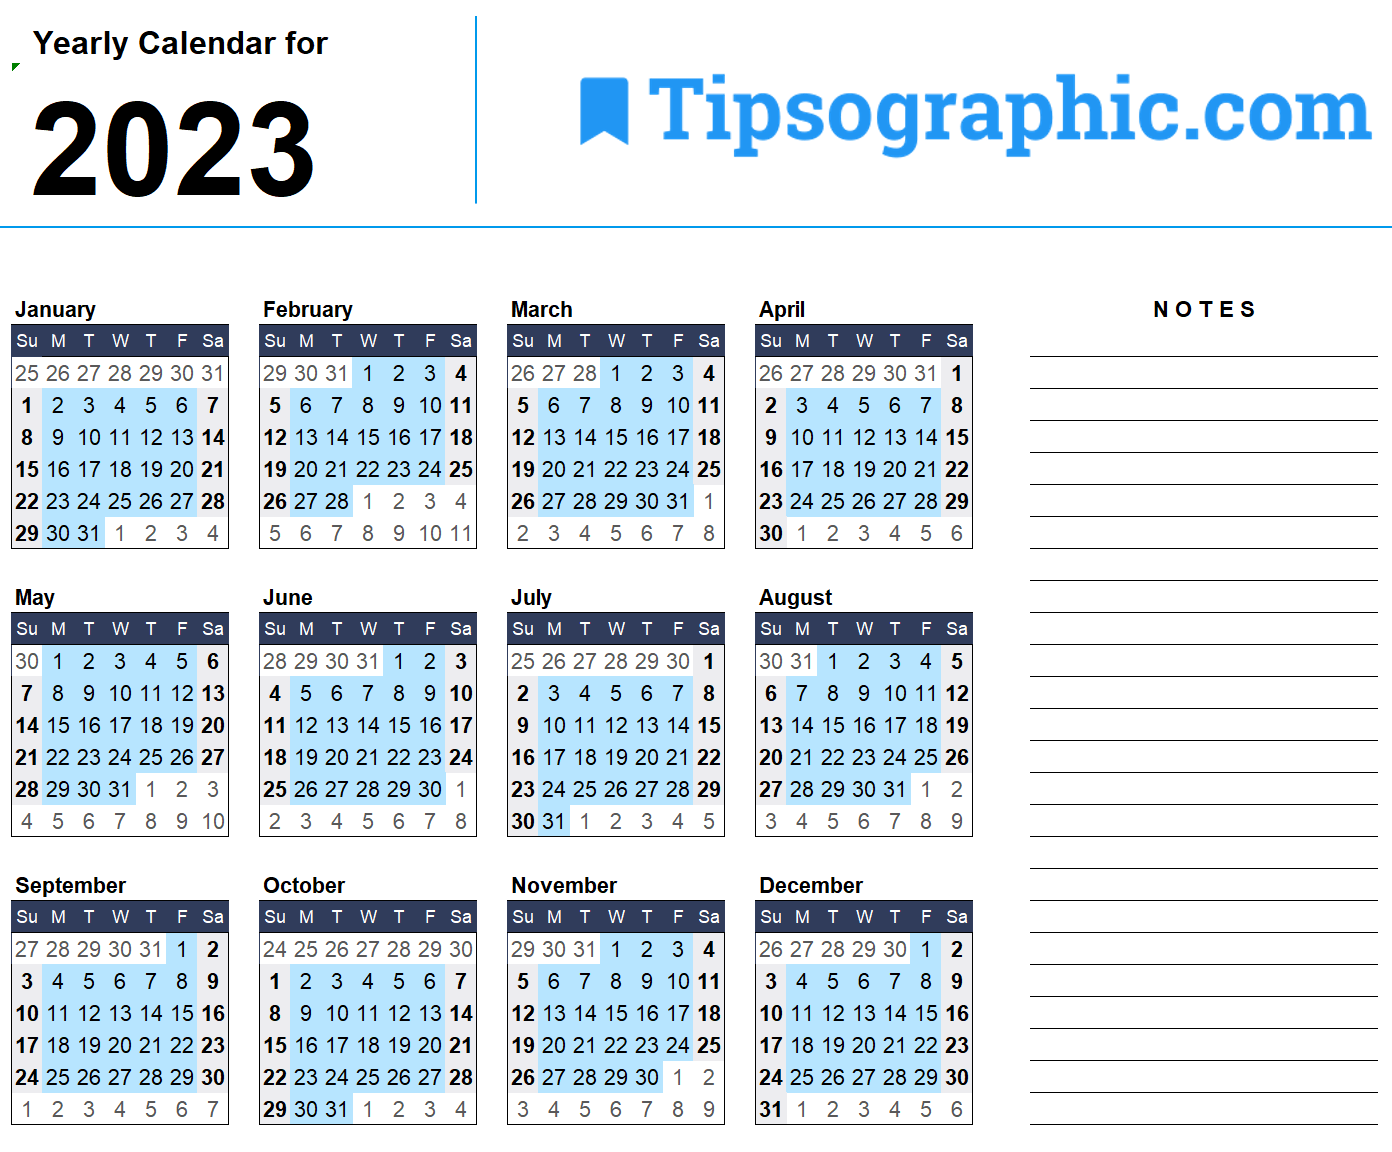 free-download-download-the-2023-yearly-calendar